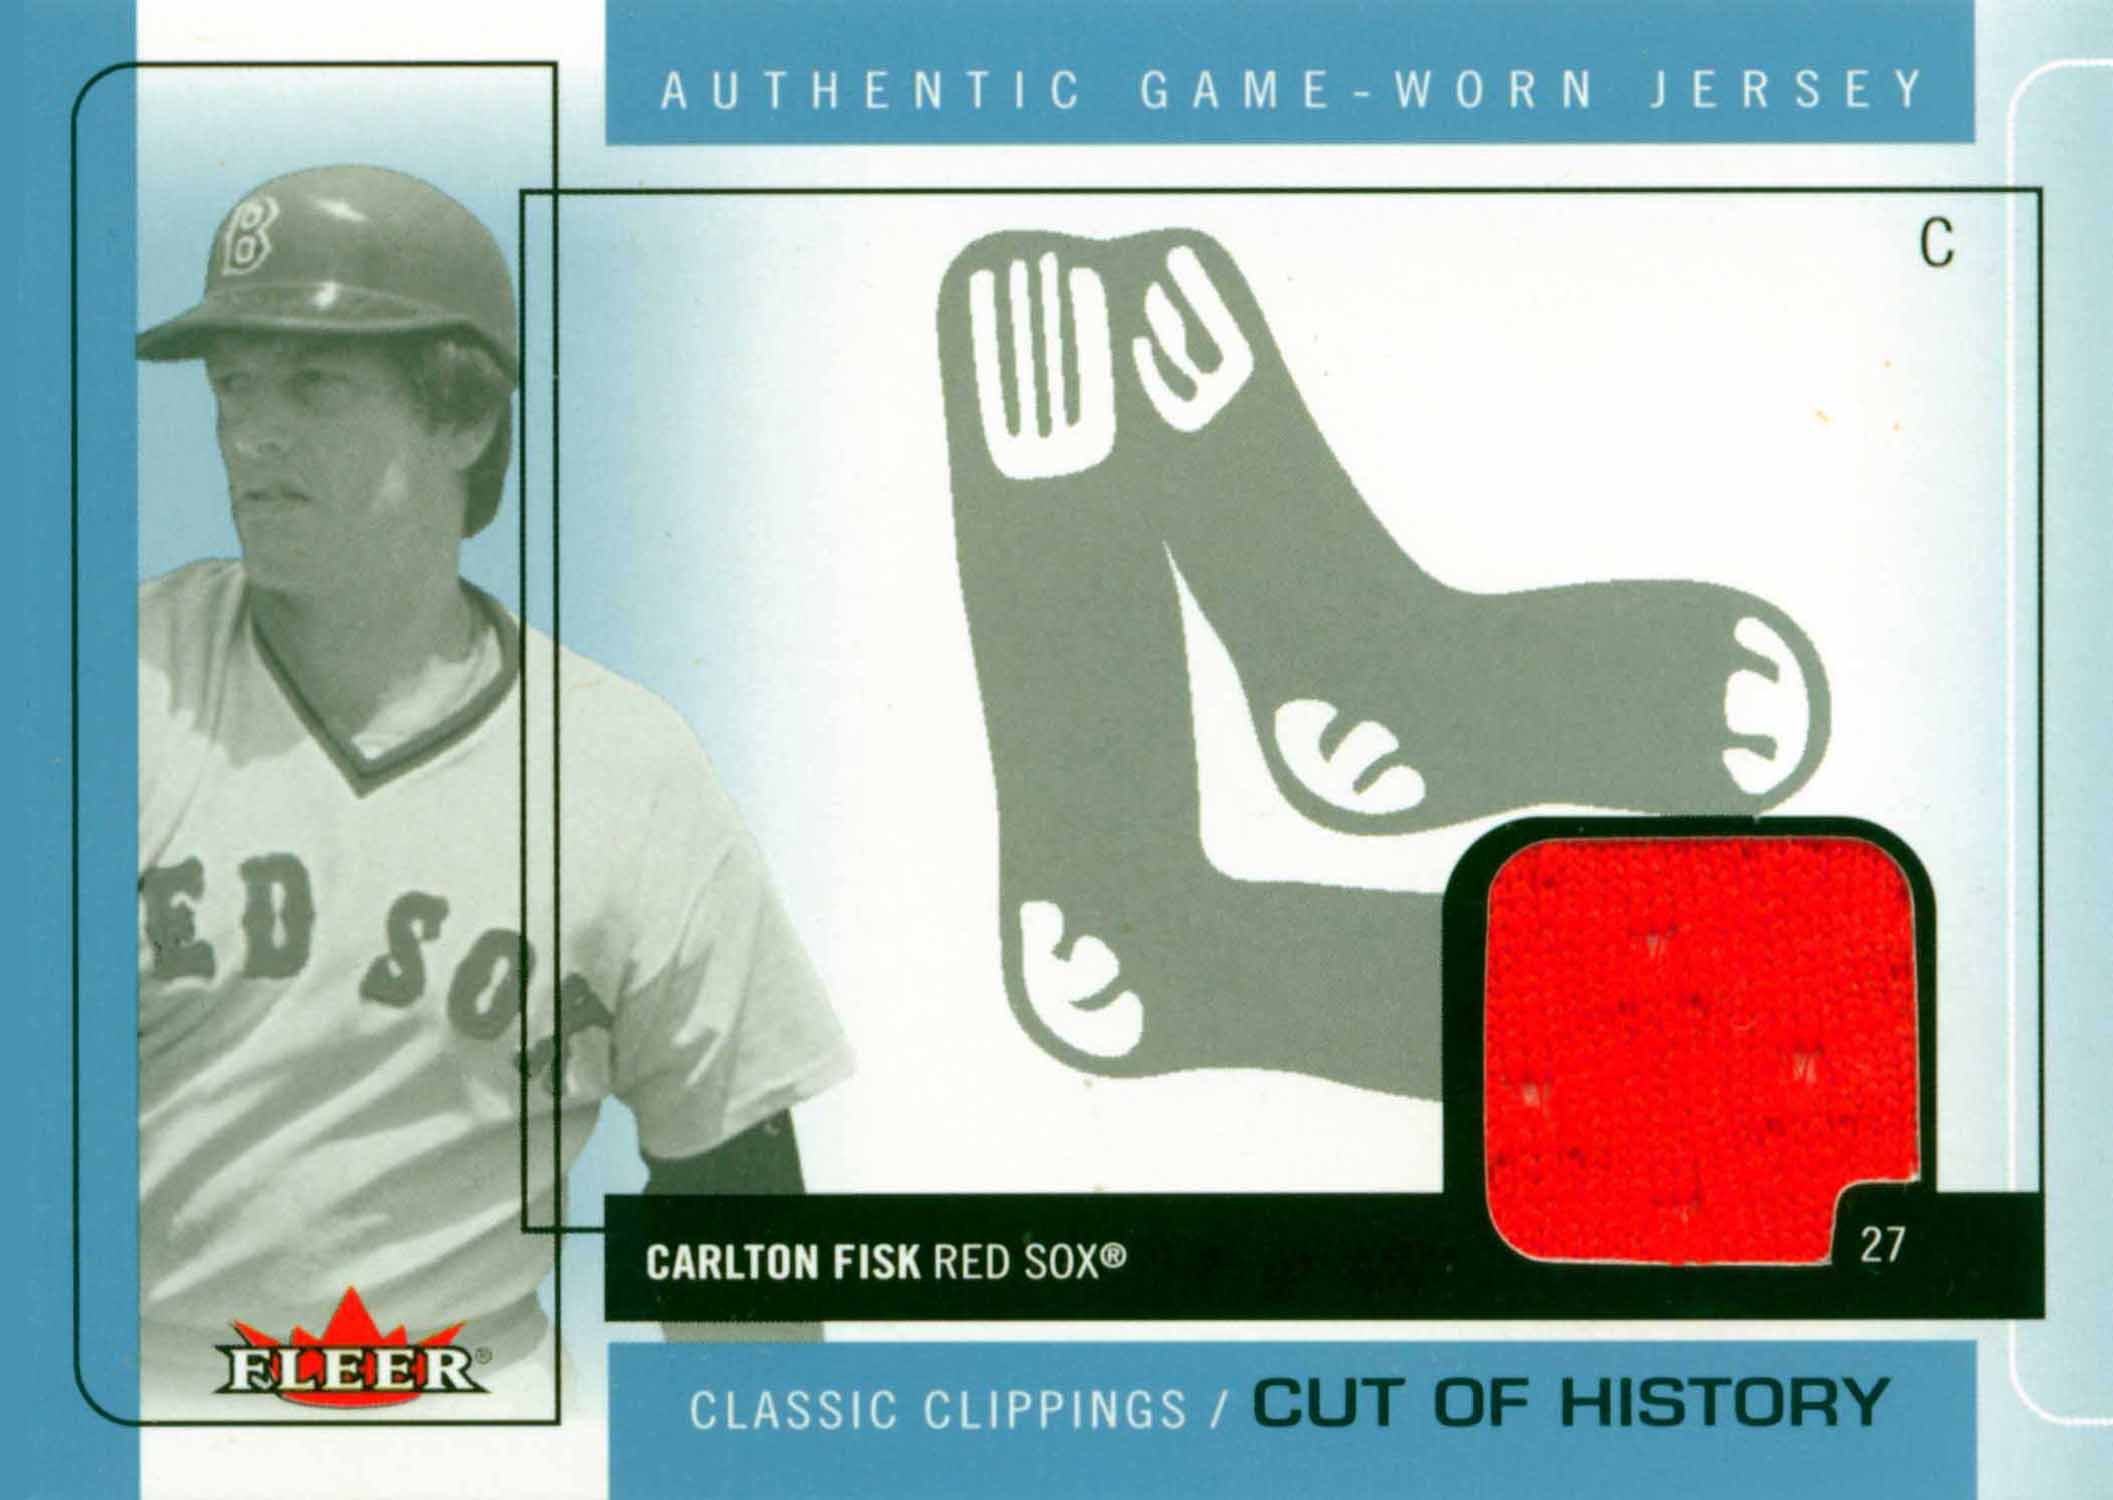 2005 Classic Clippings Cut of History Single Jersey Blue